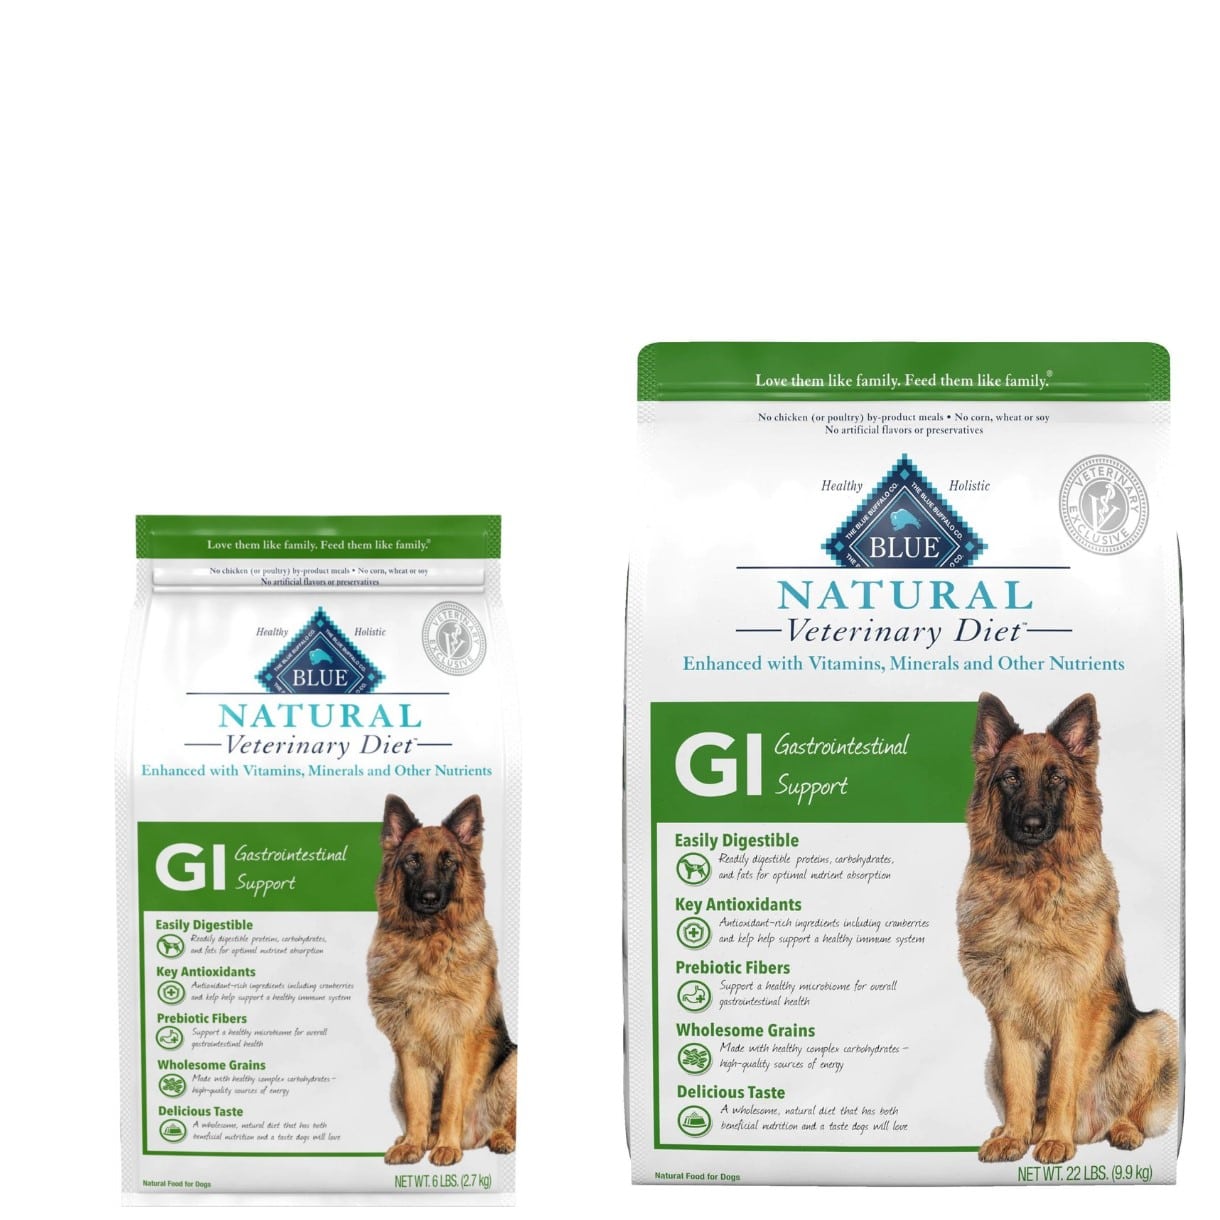 Blue Buffalo Natural Veterinary Diet GI Gastrointestinal Support Dry Dog Food